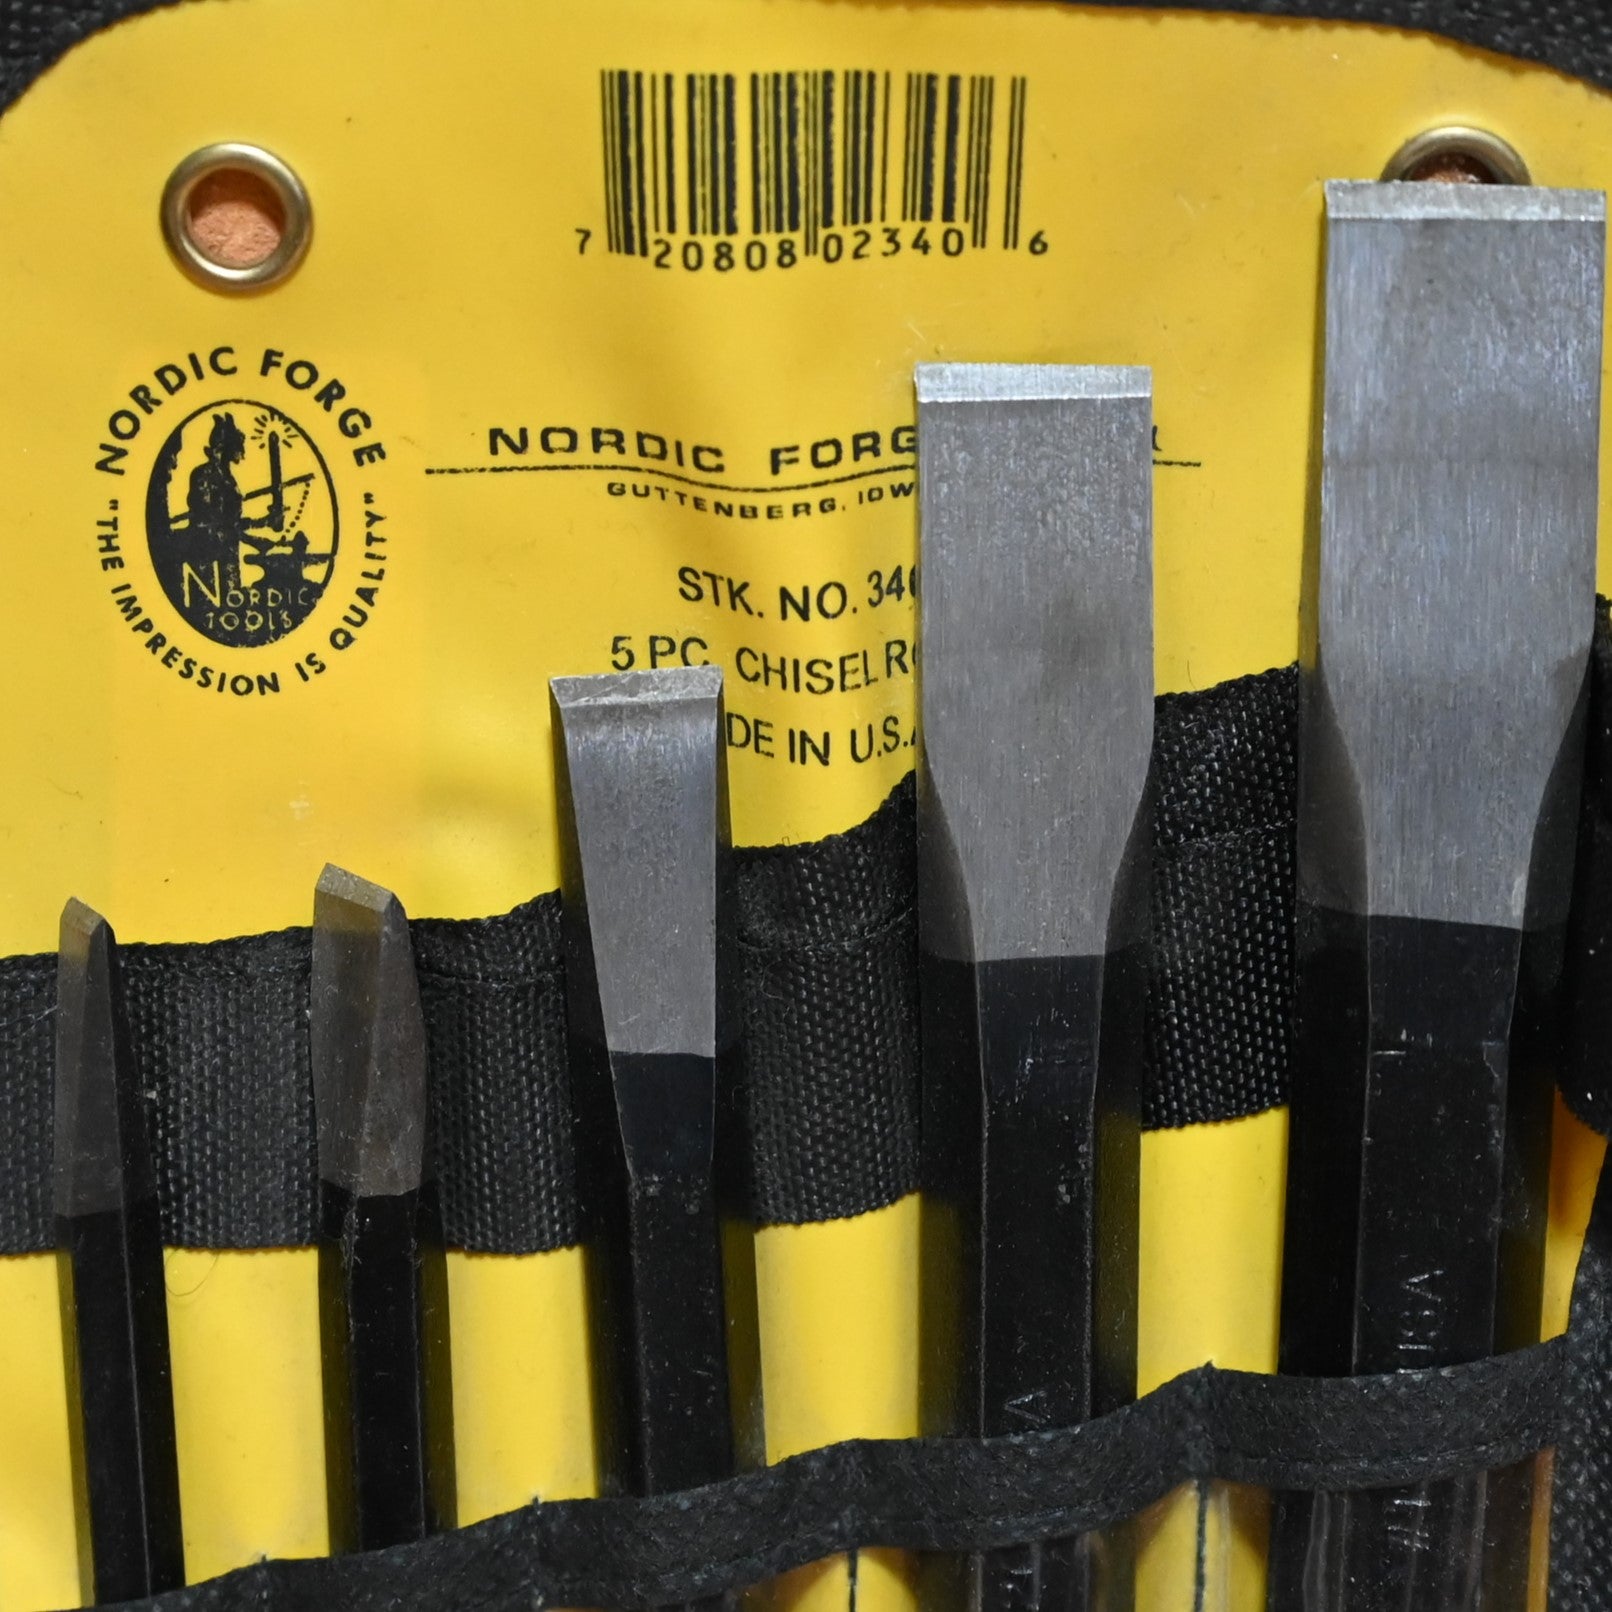 5 Piece Chisel Tool Roll close up view